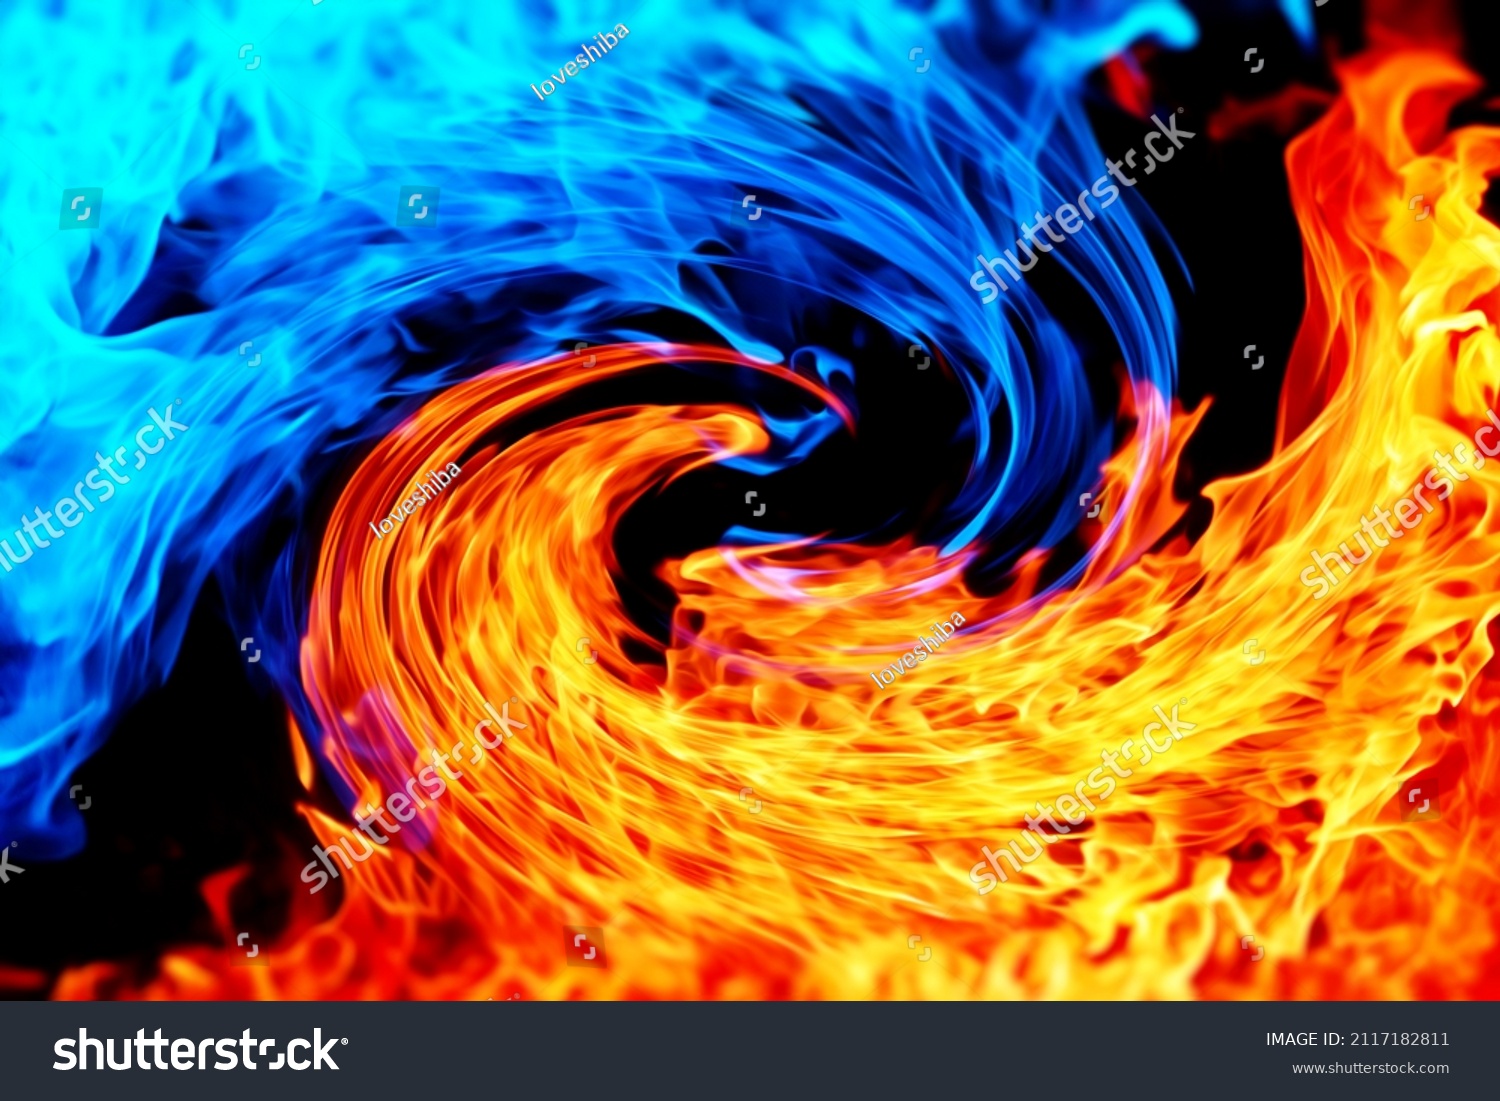 Background image of blue and red flames facing each other #2117182811